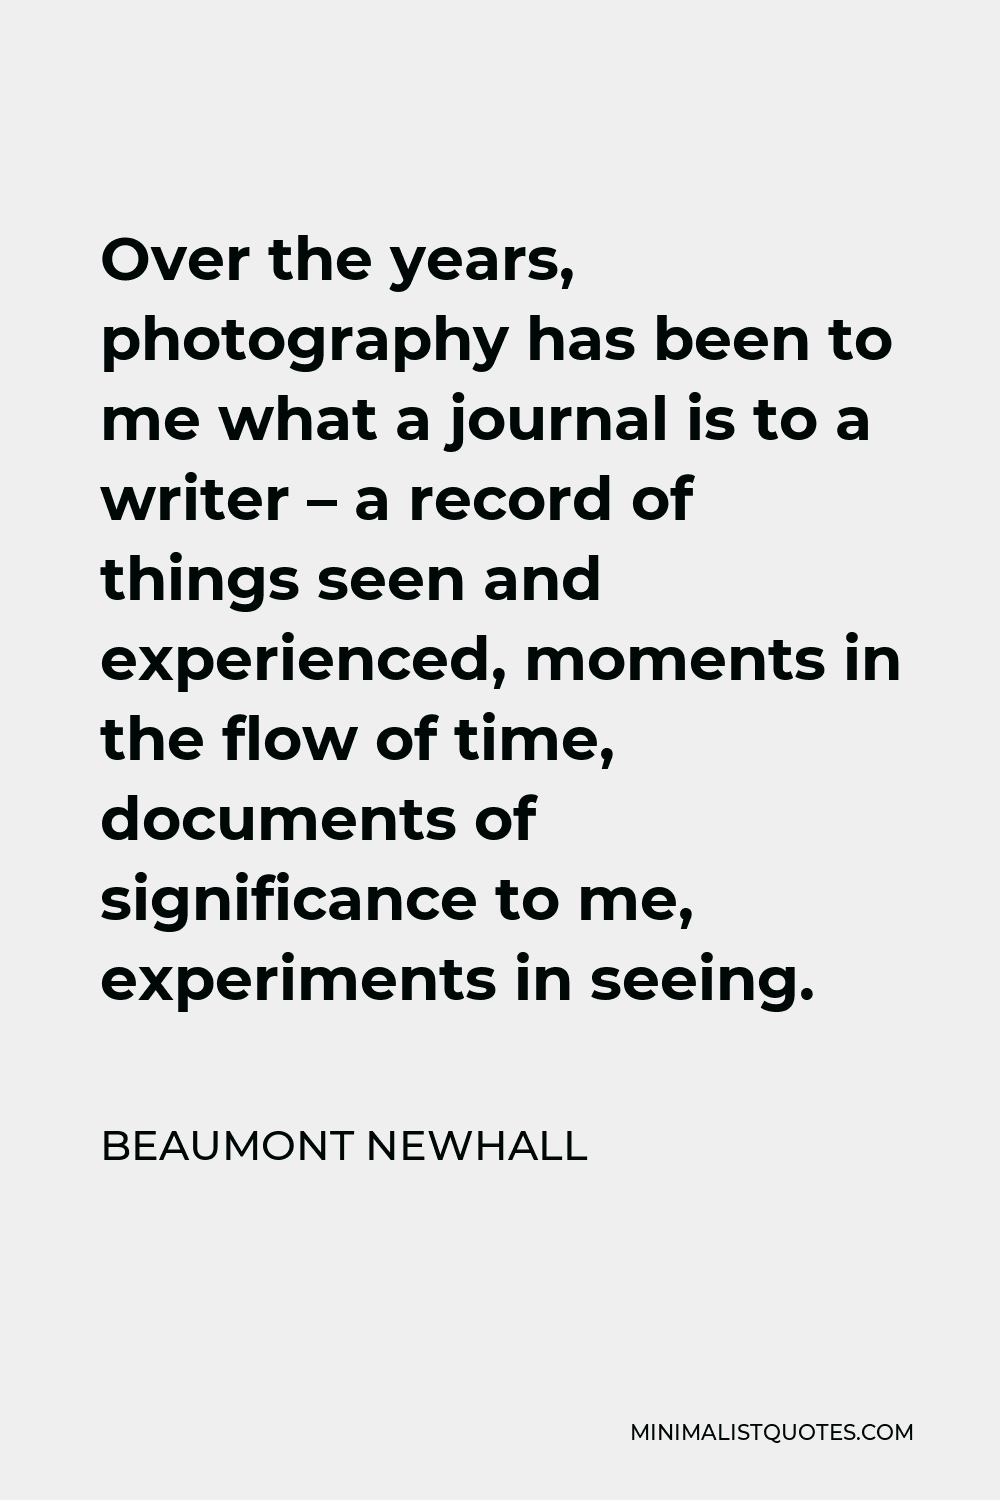 Beaumont Newhall Quote - Over the years, photography has been to me what a journal is to a writer – a record of things seen and experienced, moments in the flow of time, documents of significance to me, experiments in seeing.